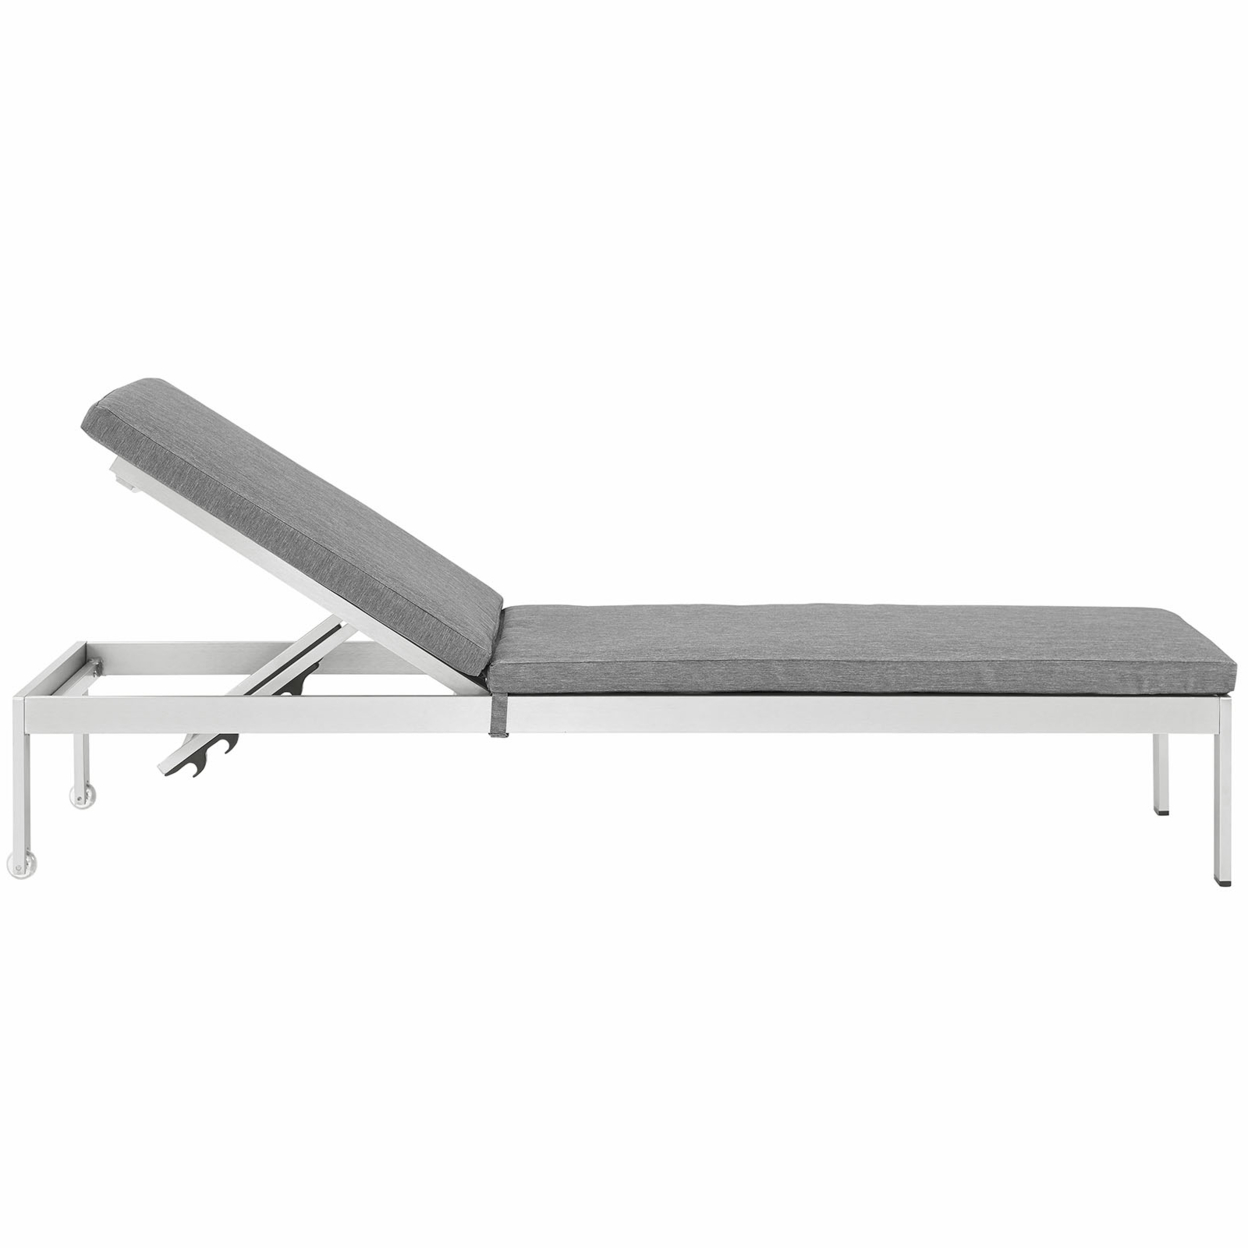 Shore Outdoor Patio Aluminum Chaise with Cushions Silver gray - image 3 of 5